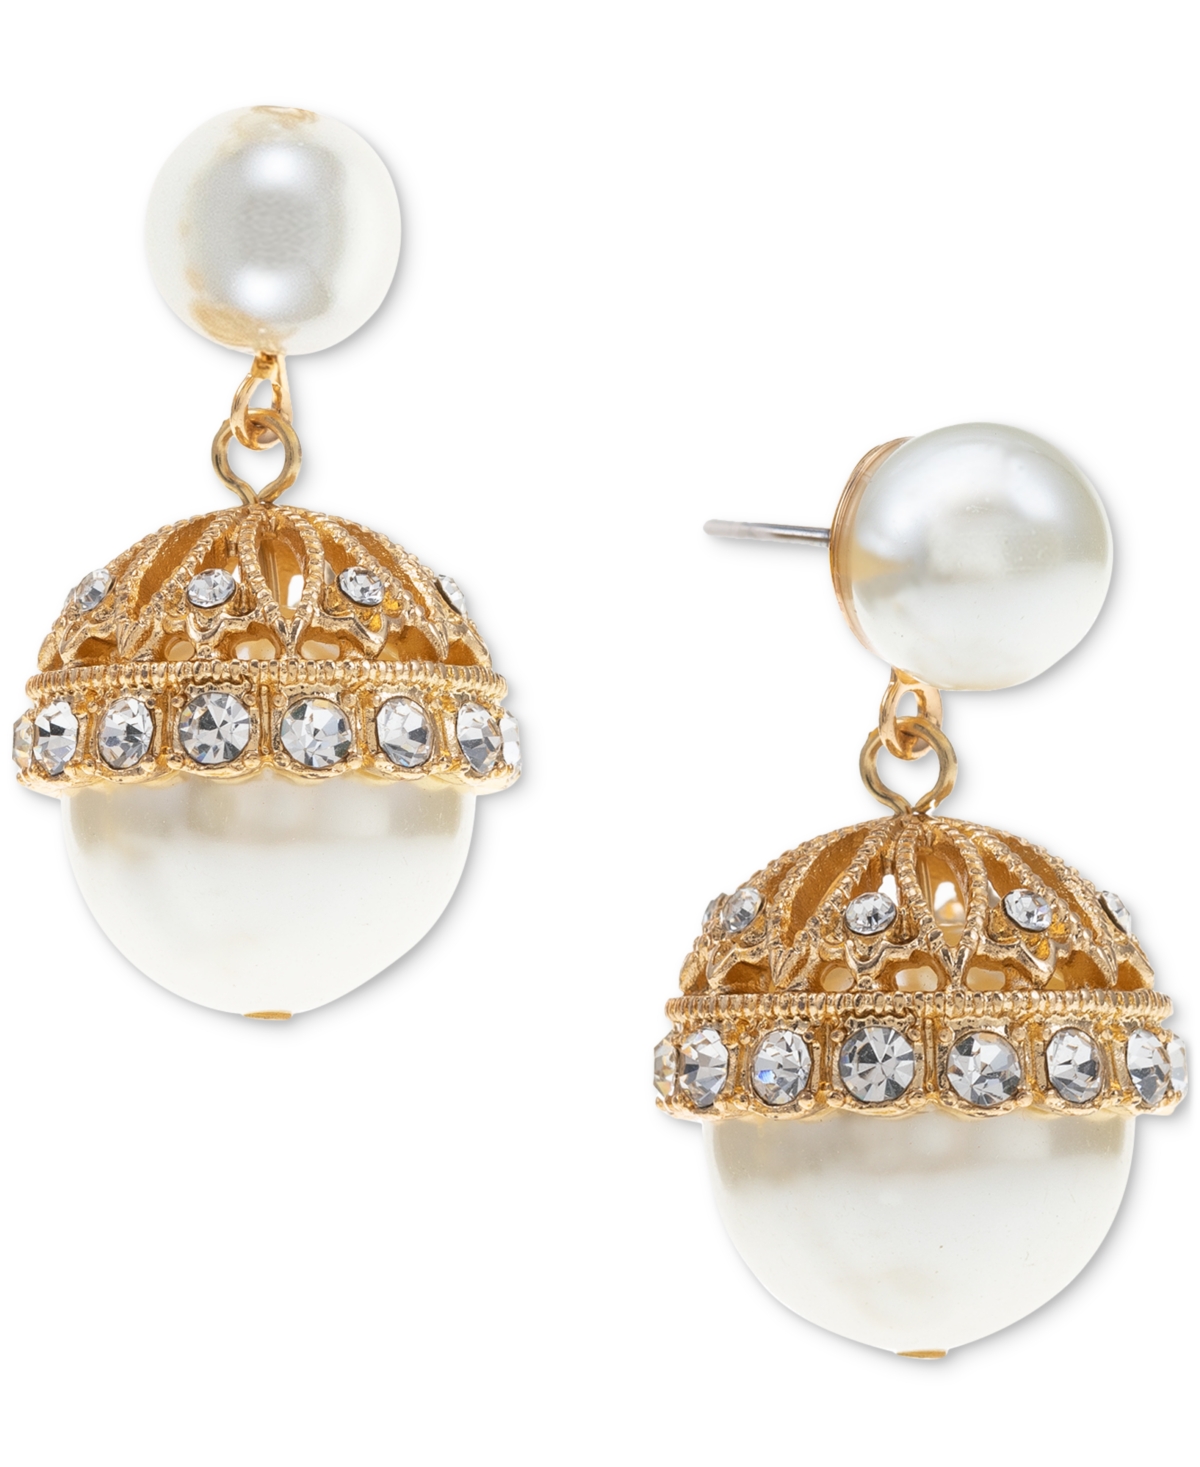 CHARTER CLUB GOLD-TONE PAVE & IMITATION PEARL DROP EARRINGS, CREATED FOR MACY'S